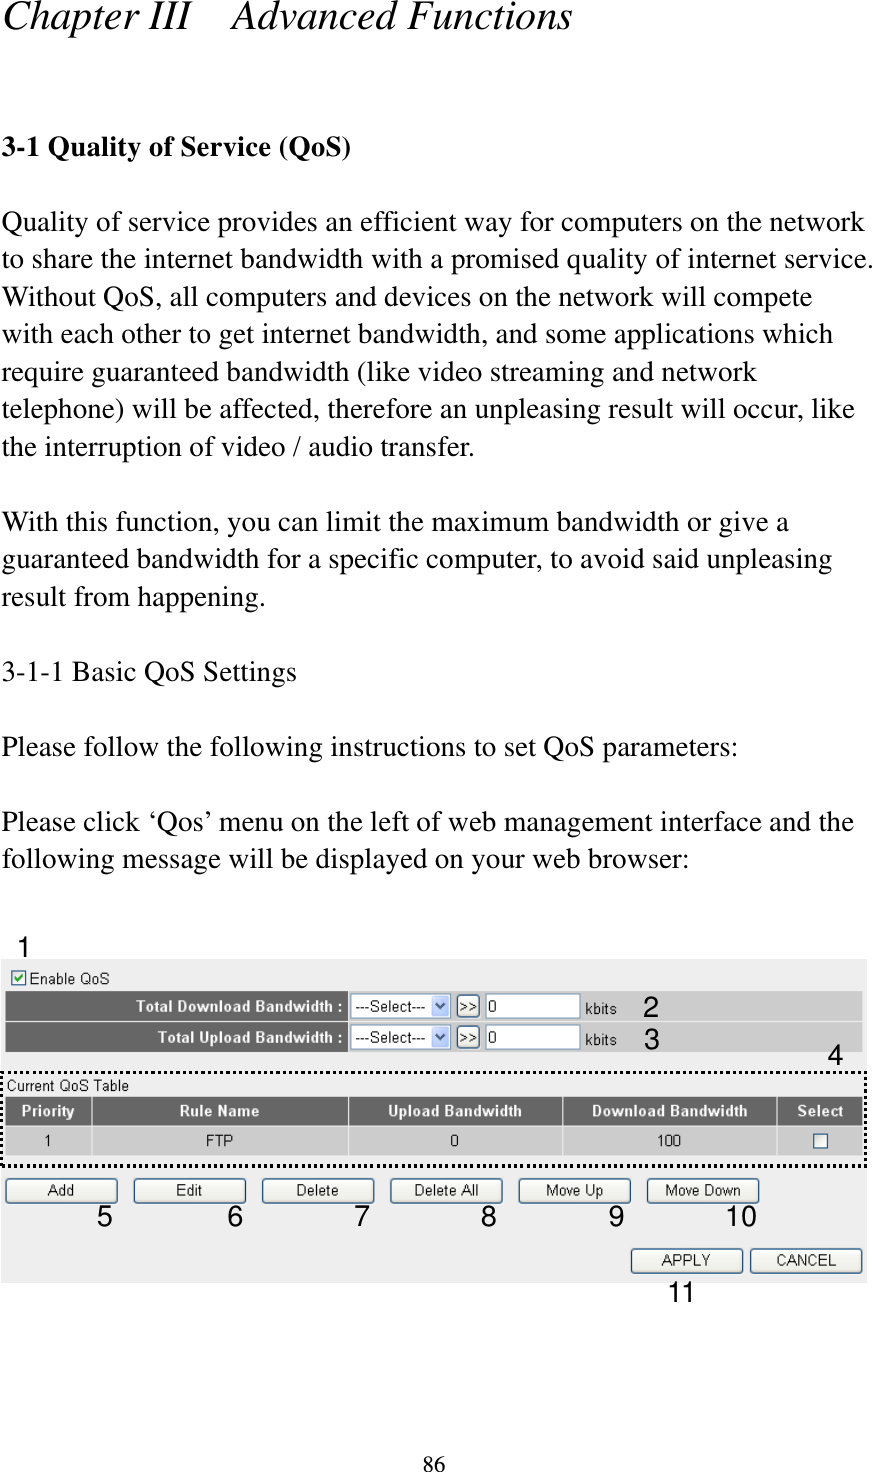 86 Chapter III    Advanced Functions  3-1 Quality of Service (QoS)  Quality of service provides an efficient way for computers on the network to share the internet bandwidth with a promised quality of internet service. Without QoS, all computers and devices on the network will compete with each other to get internet bandwidth, and some applications which require guaranteed bandwidth (like video streaming and network telephone) will be affected, therefore an unpleasing result will occur, like the interruption of video / audio transfer.    With this function, you can limit the maximum bandwidth or give a guaranteed bandwidth for a specific computer, to avoid said unpleasing result from happening.  3-1-1 Basic QoS Settings  Please follow the following instructions to set QoS parameters:  Please click ‘Qos’ menu on the left of web management interface and the following message will be displayed on your web browser:       1 2 34 5 6 7 8 9 10 11 